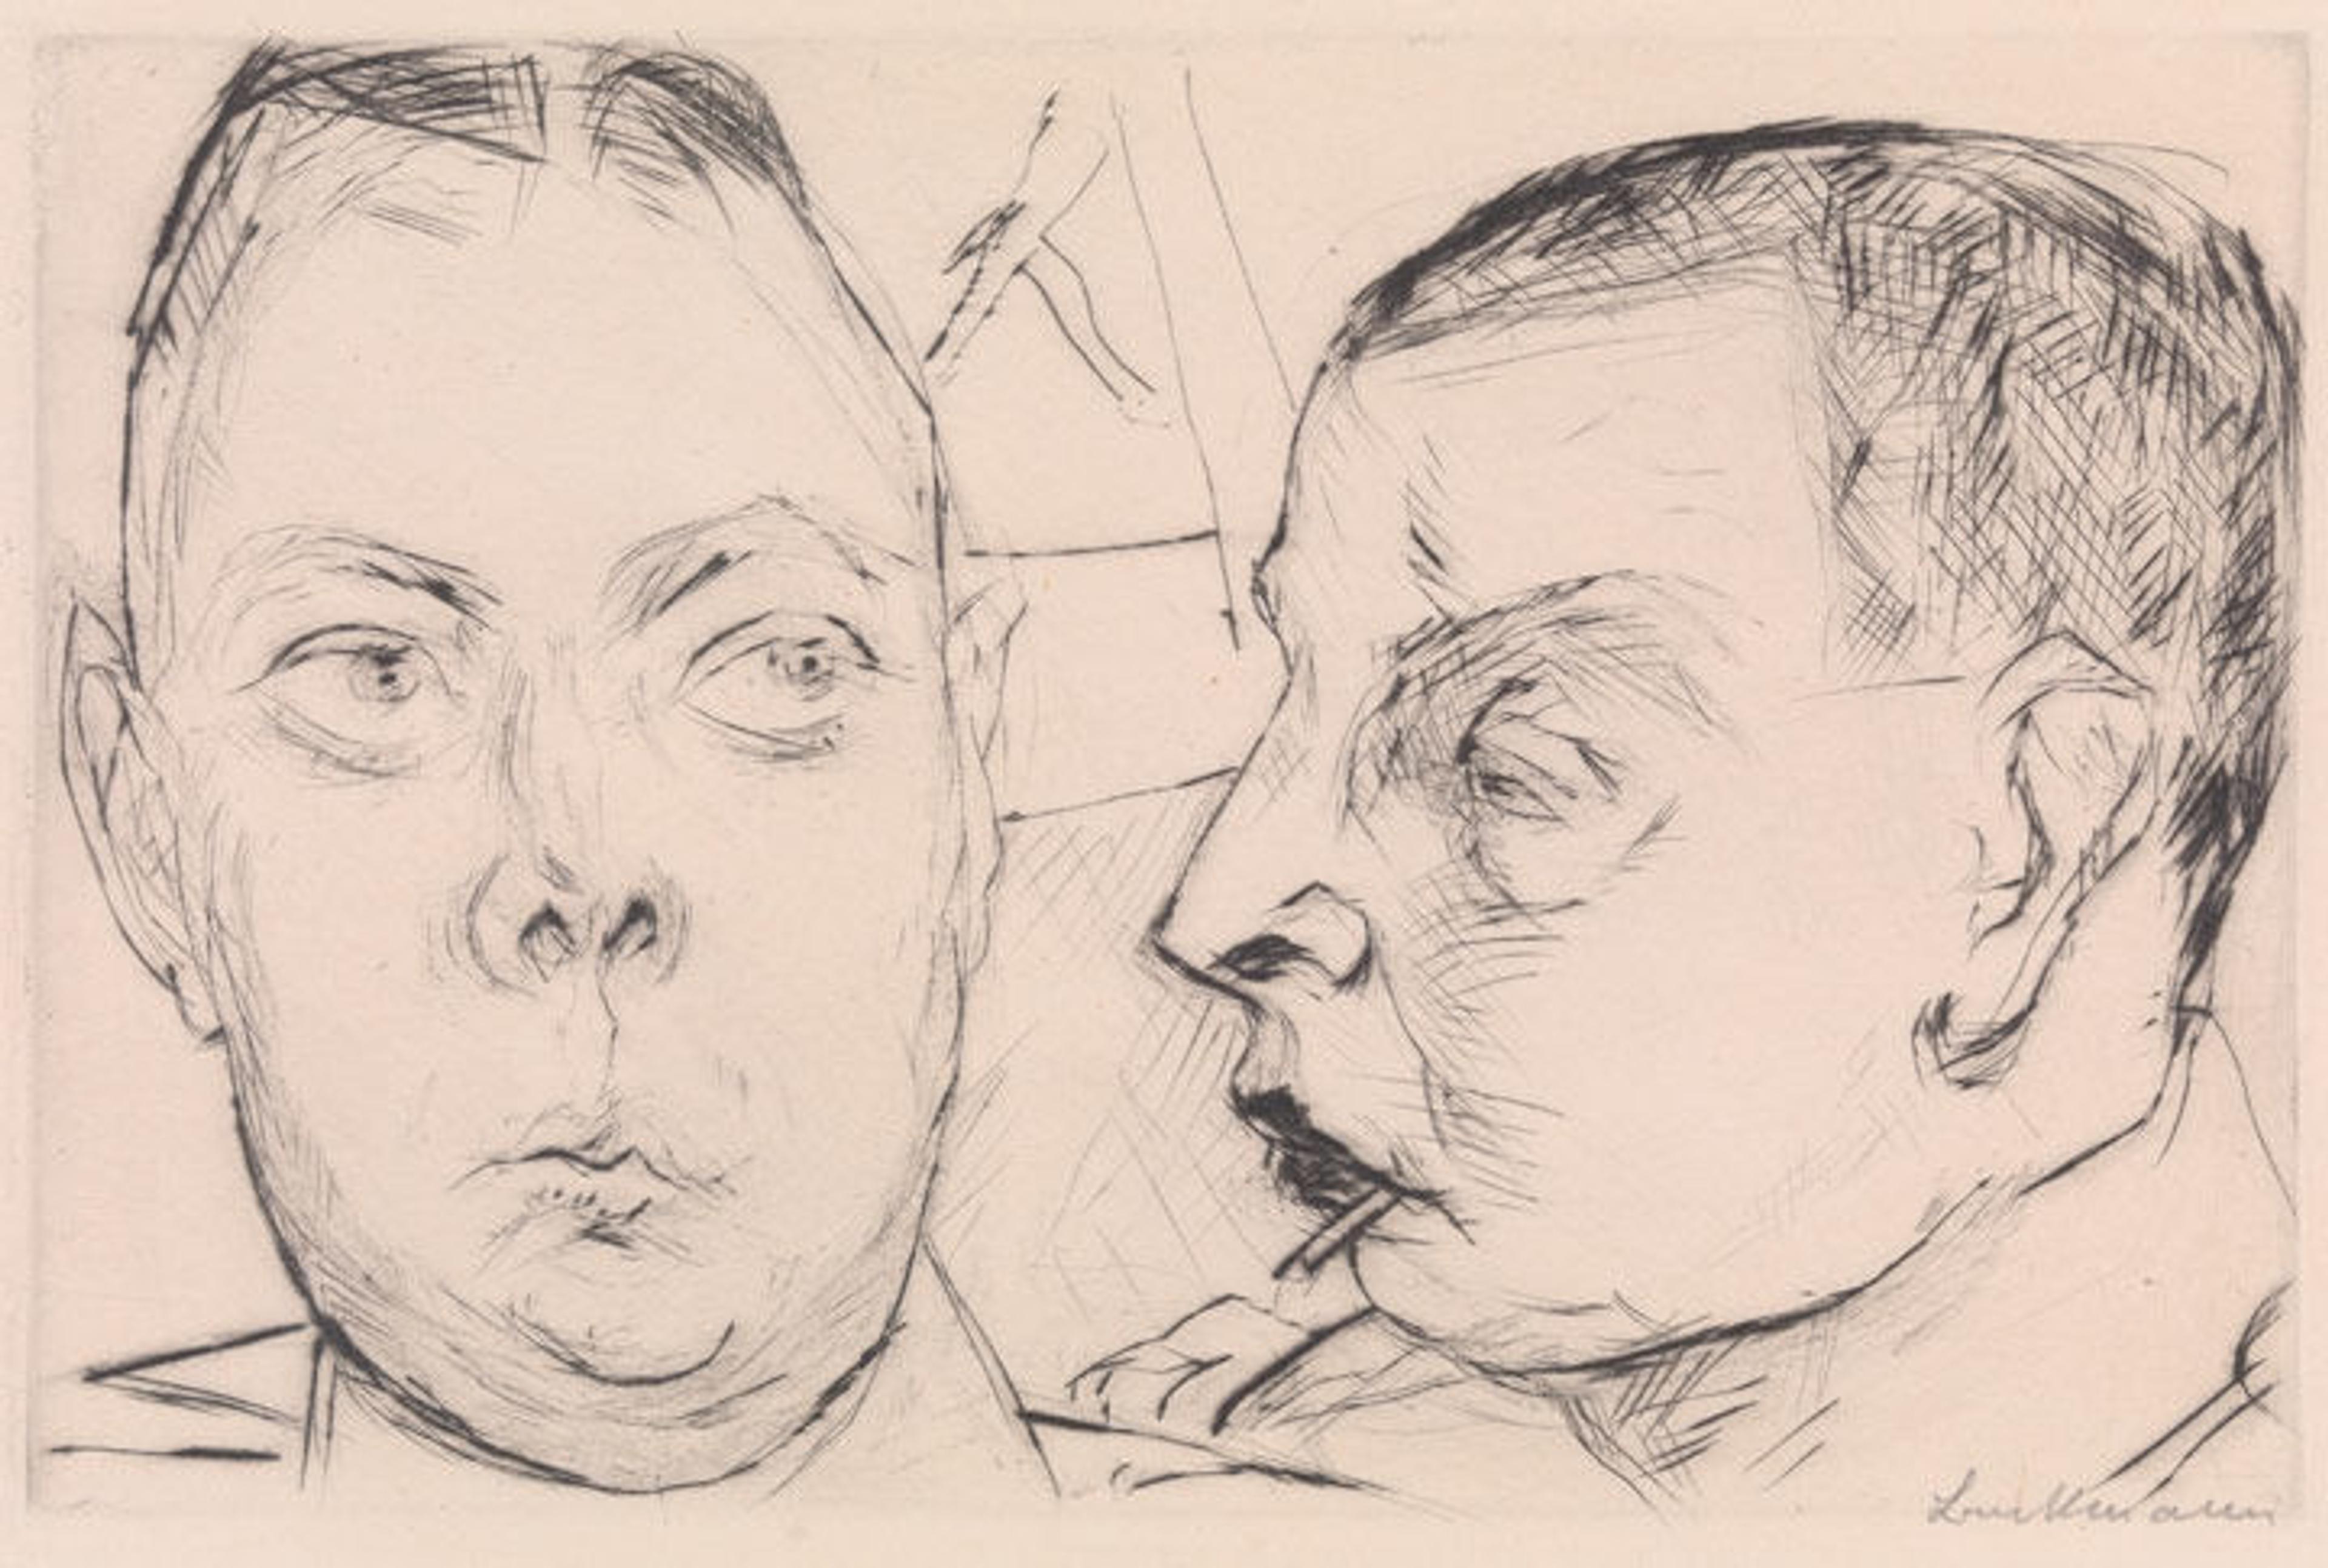 Max Beckmann | Two Officers, 1915 | Drypoint drawing of two soldiers, one facing the viewer and the other seen in profile